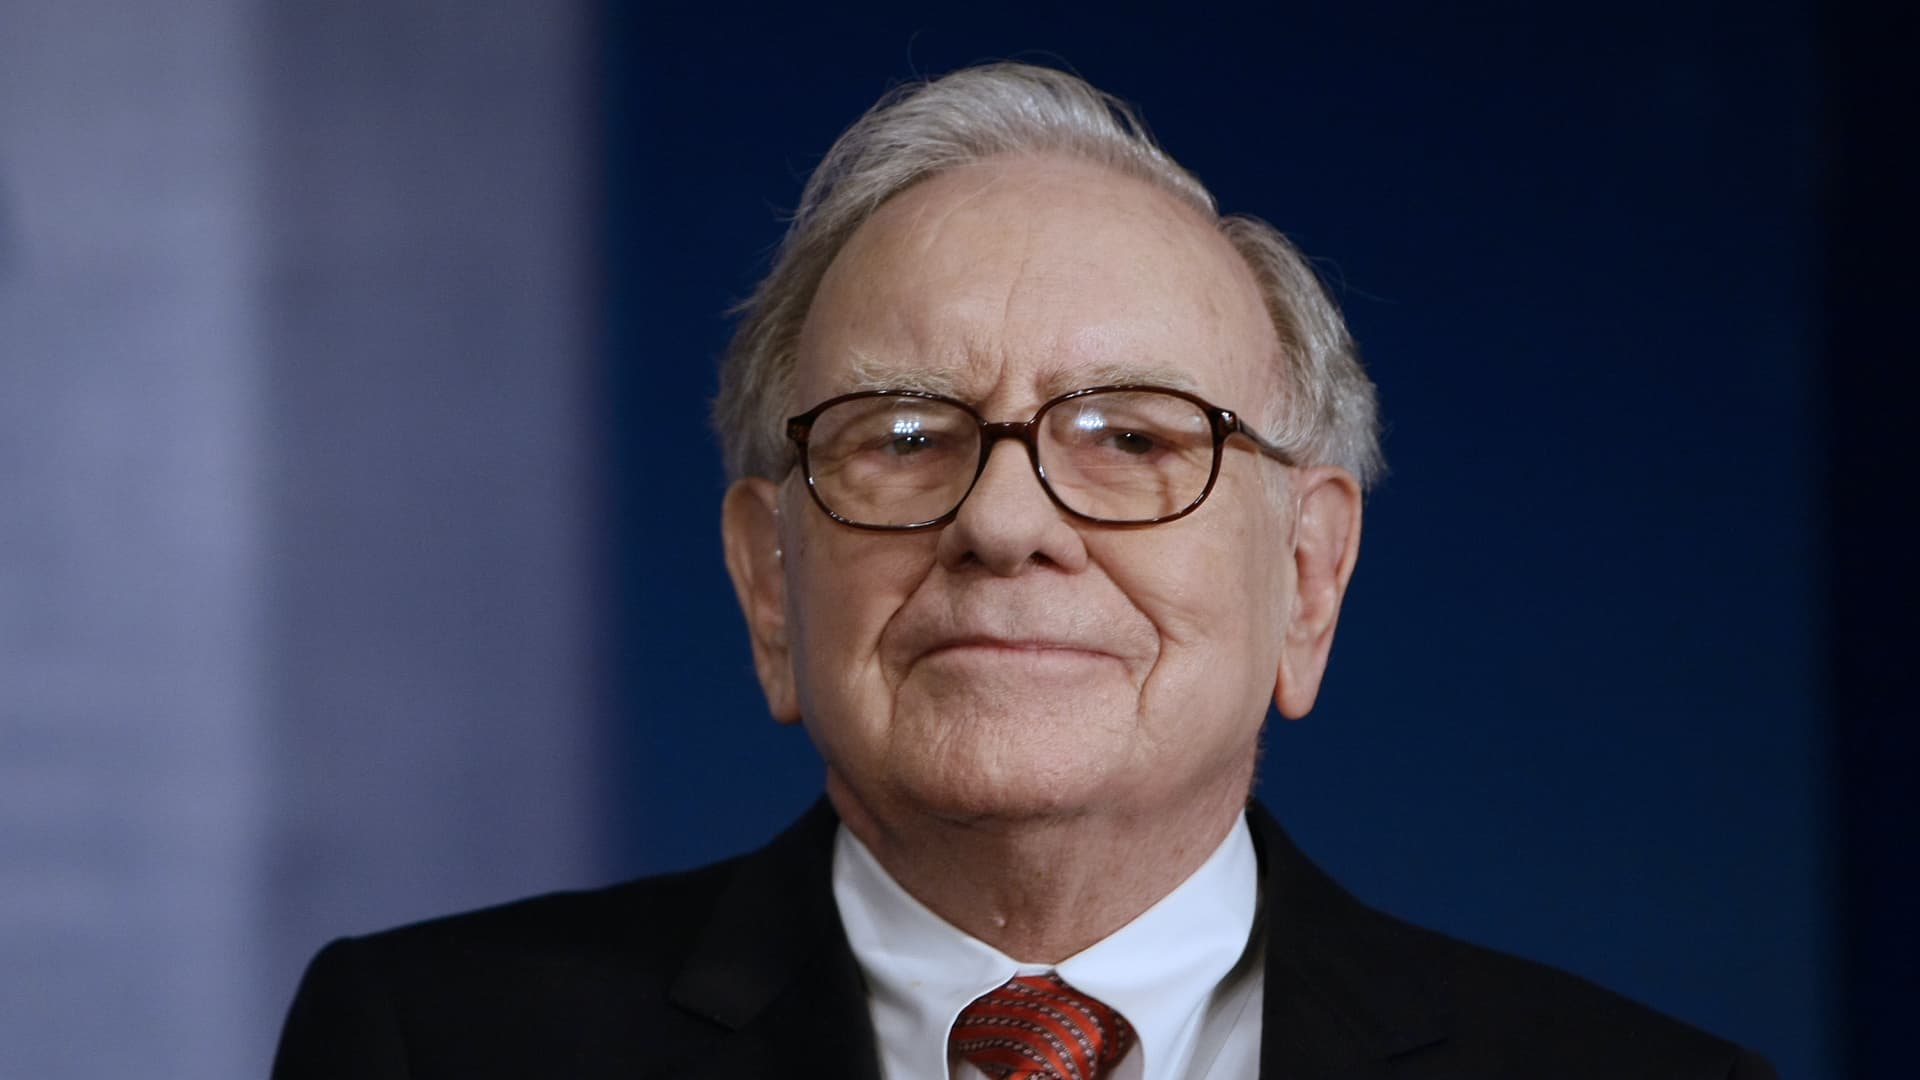 Warren Buffett owns these stocks and analysts love them too